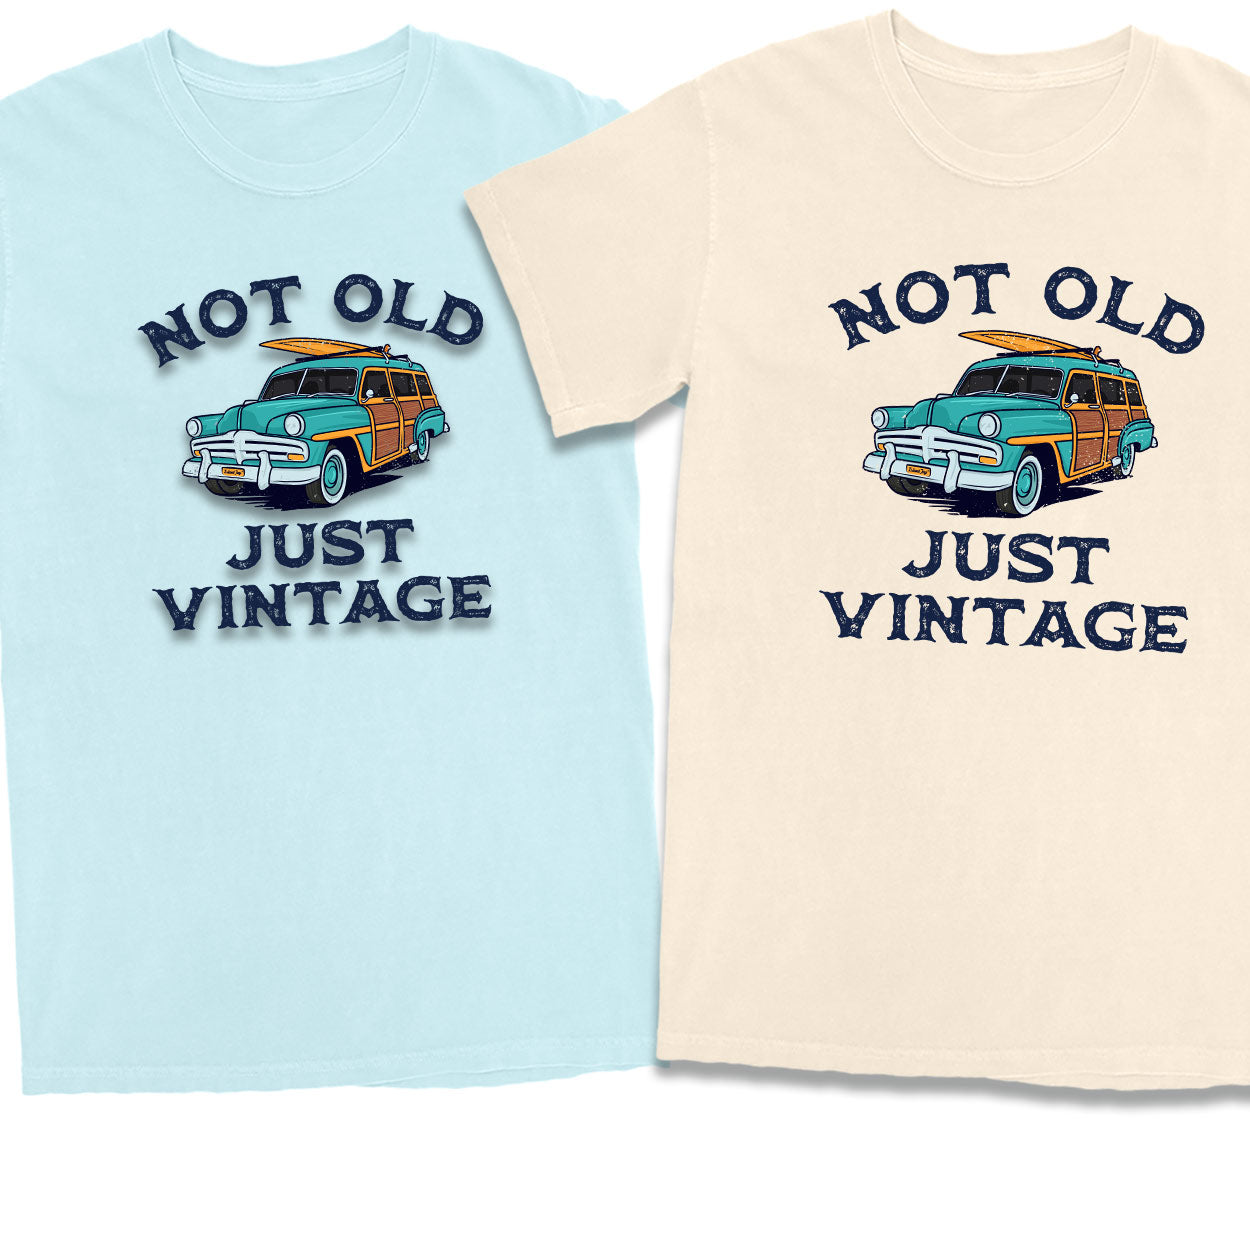 Shop Men's I'm Not Old Just Vintage tees featuring an old woody car and surfboard. Shows the design in a distressed vintage style.